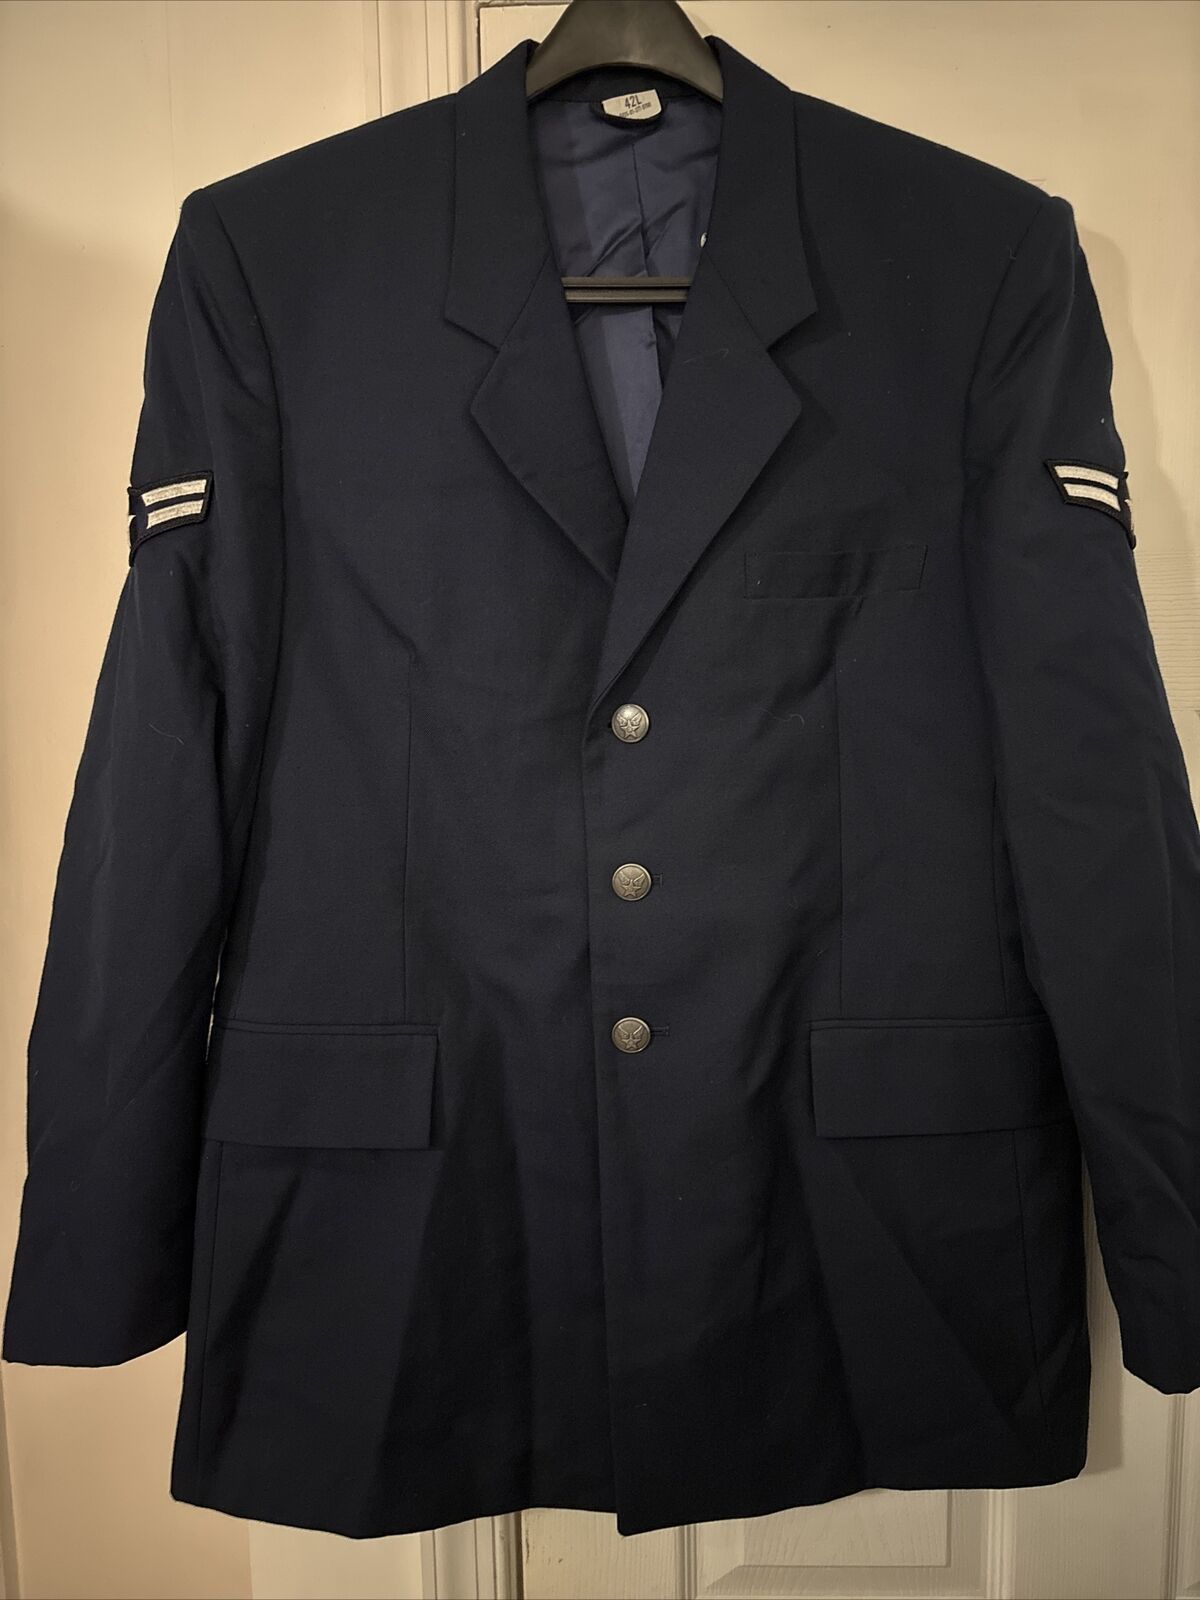 Male Enlisted US Air Force USAF Blue Service Jacket Coat Size 42 Long